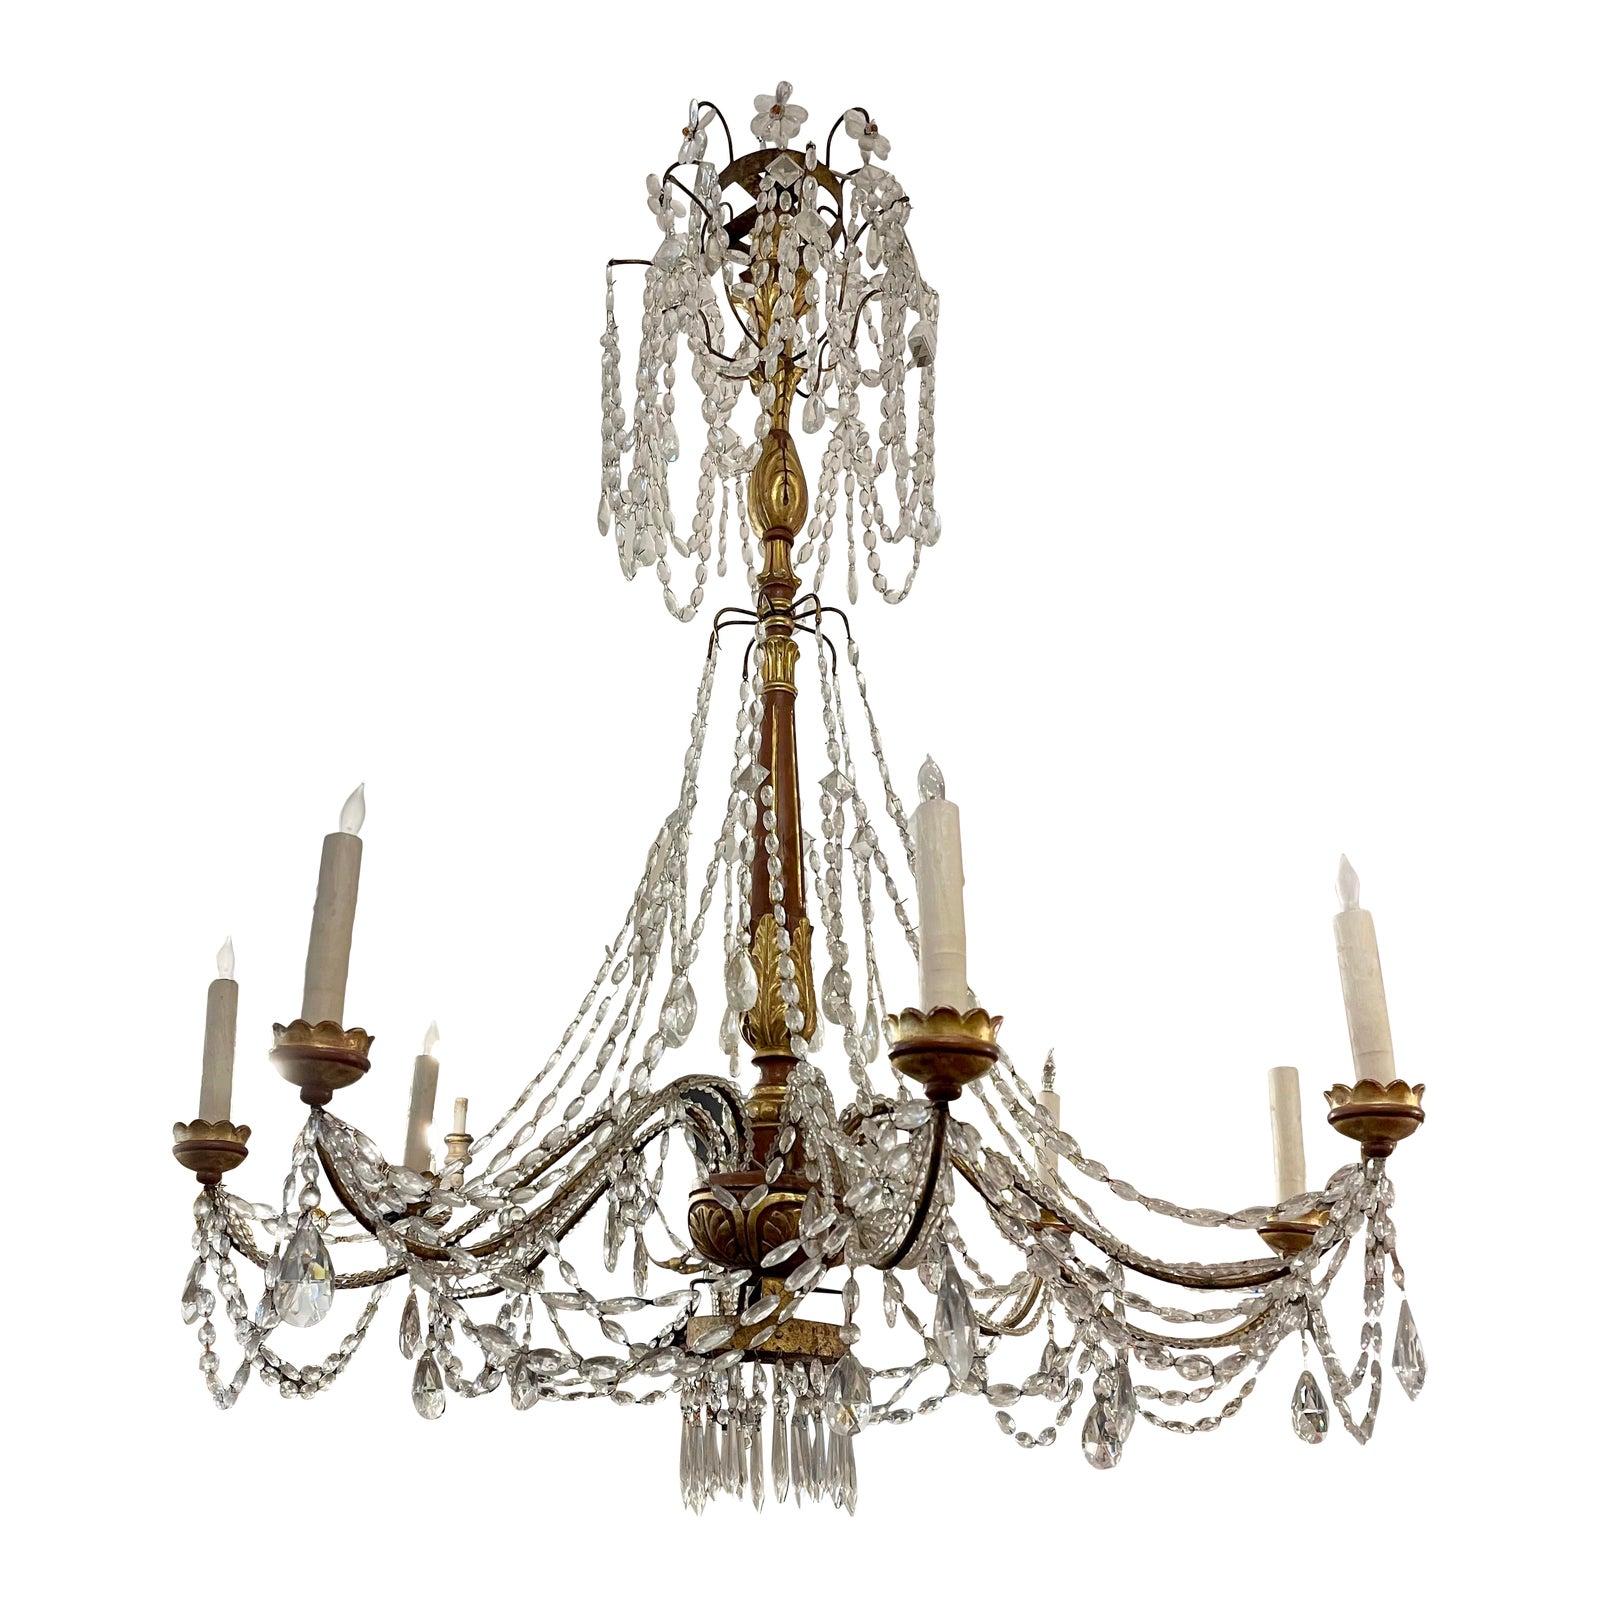 Monumental Antique Italian Giltwood Chandelier, Therien Collection